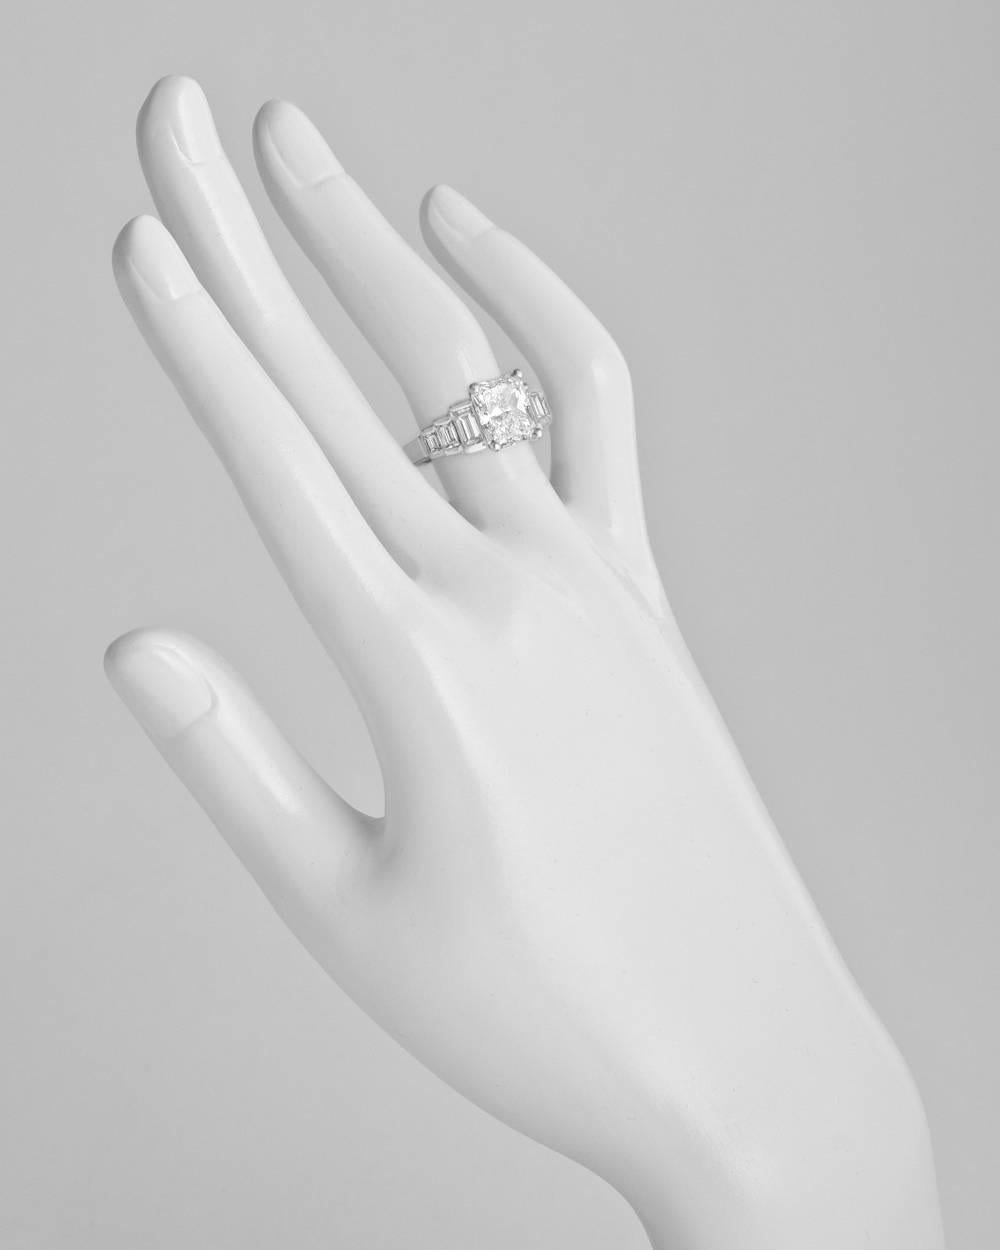 Diamond engagement ring, centering a colorless radiant-cut diamond weighing 3.00 carats (D-color/VS2-clarity), with baguette-cut diamond-set tiered shoulders, mounted in polished platinum. Accompanied by the GIA lab certificate for the radiant-cut